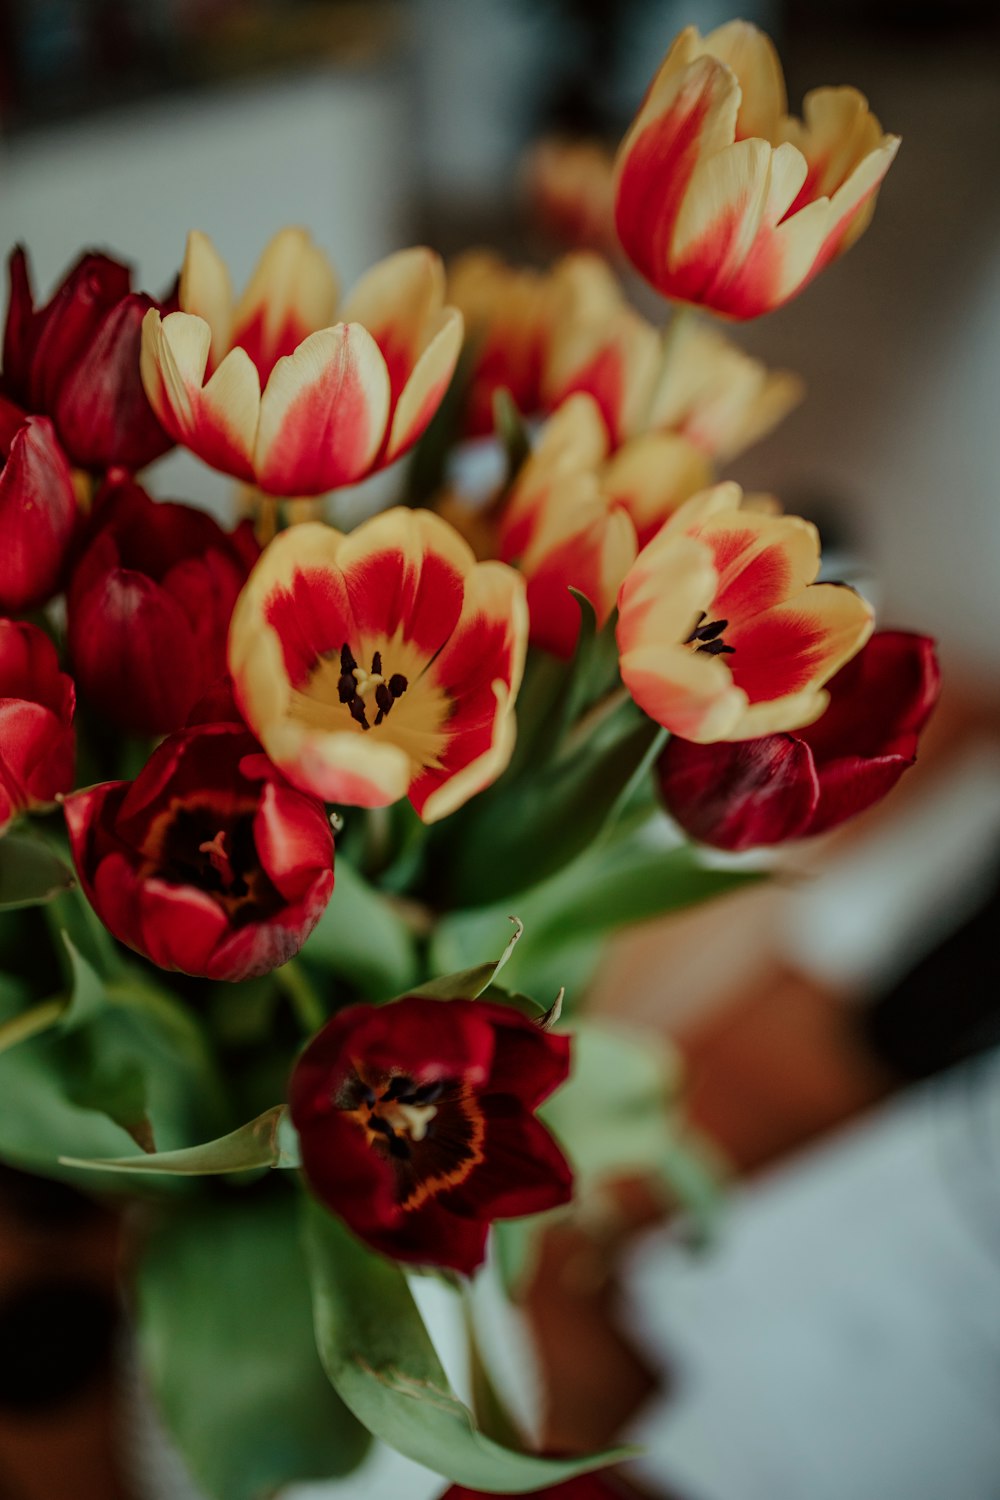 red and yellow tulips in bloom